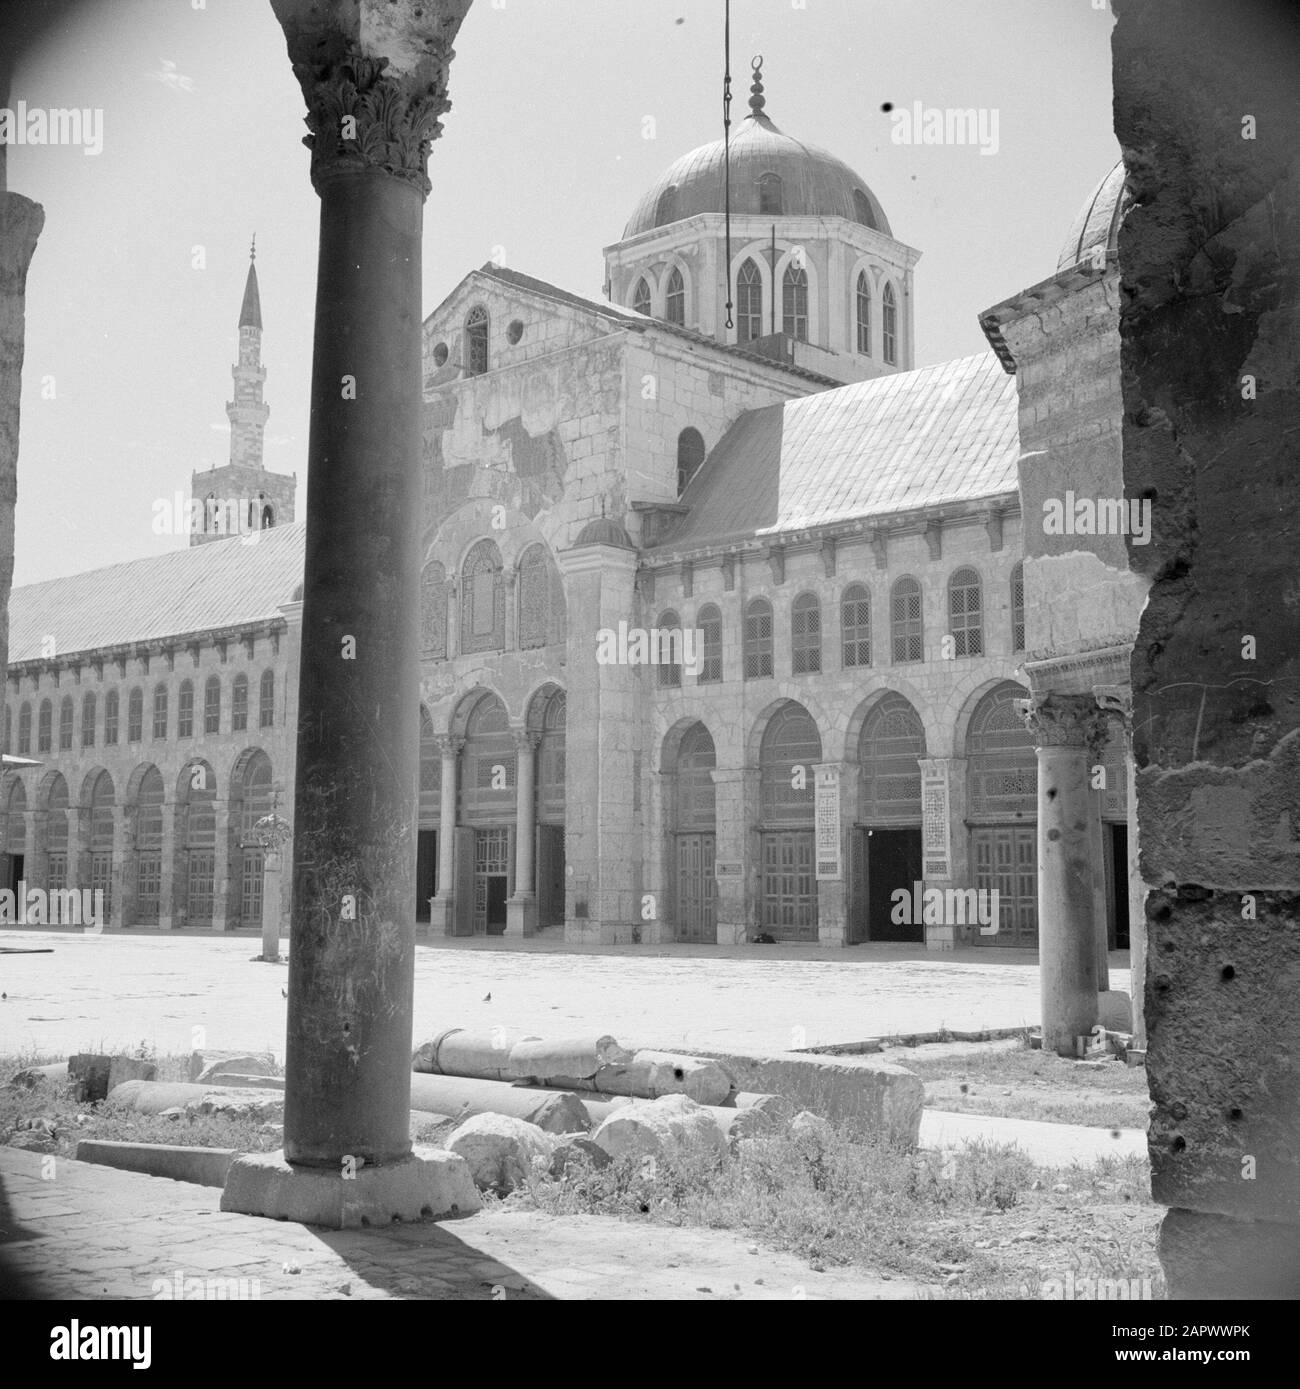 Middle East 1950-1955: Syria - Damascus  Omayad mosque, the forecourt Date: 1950 Location: Damascus, Syria Keywords: arches, domes, minarets, mosques, windows Institution name: Omayyade Mosque Stock Photo